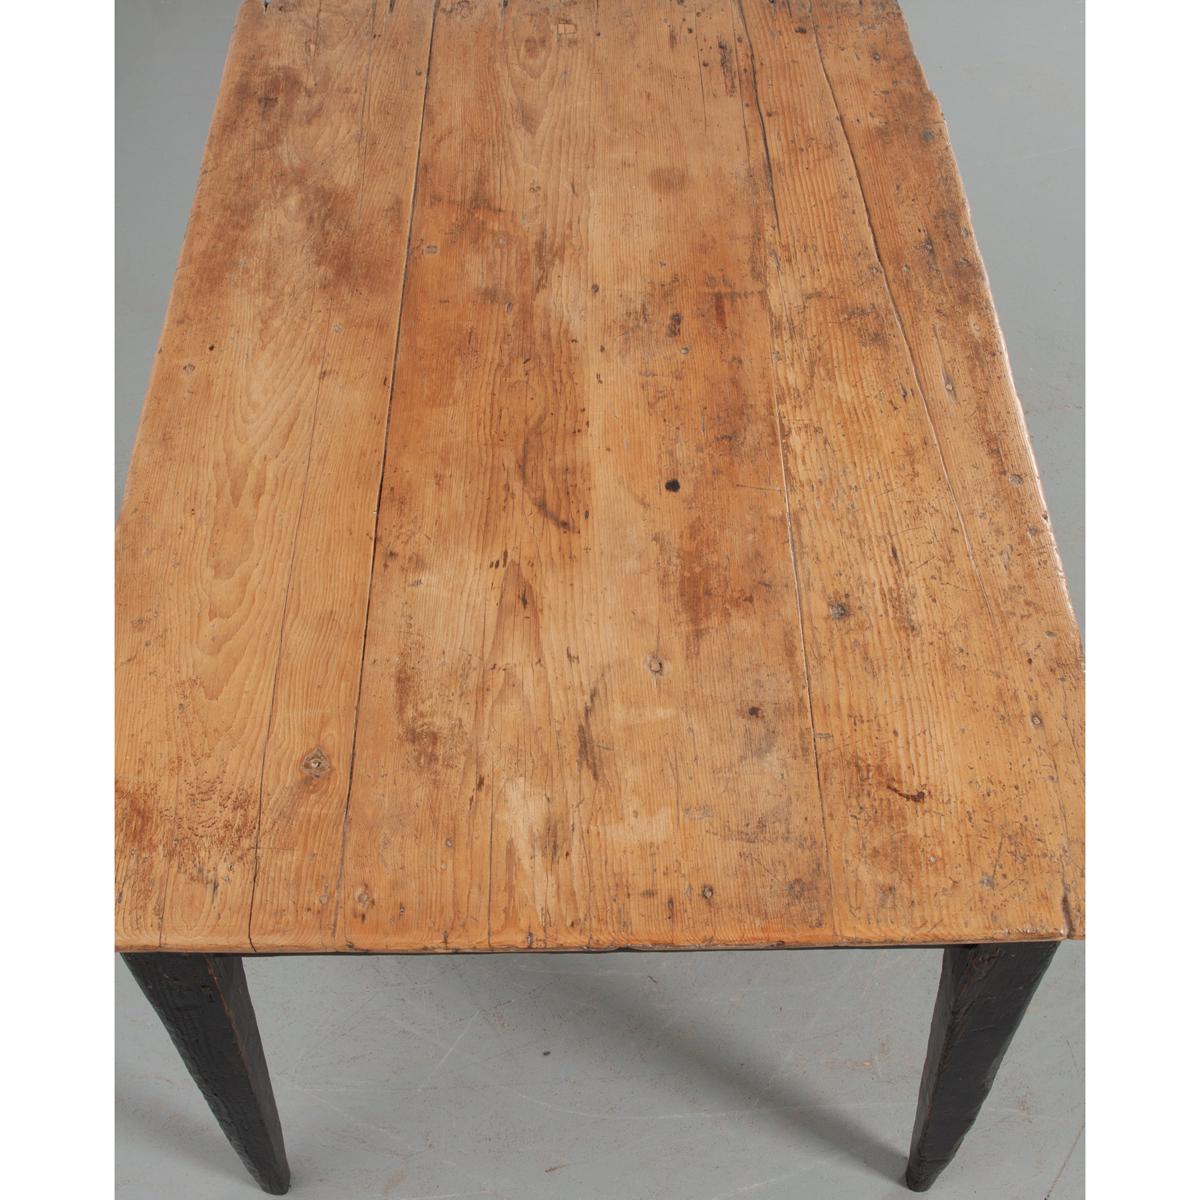 This English 19th century dining table or desk is made of pine. The top has been waxed over many years and has acquired a wonderful patina. The table base is painted a worn black finish and has a single offset drawer in the apron over tapered legs.